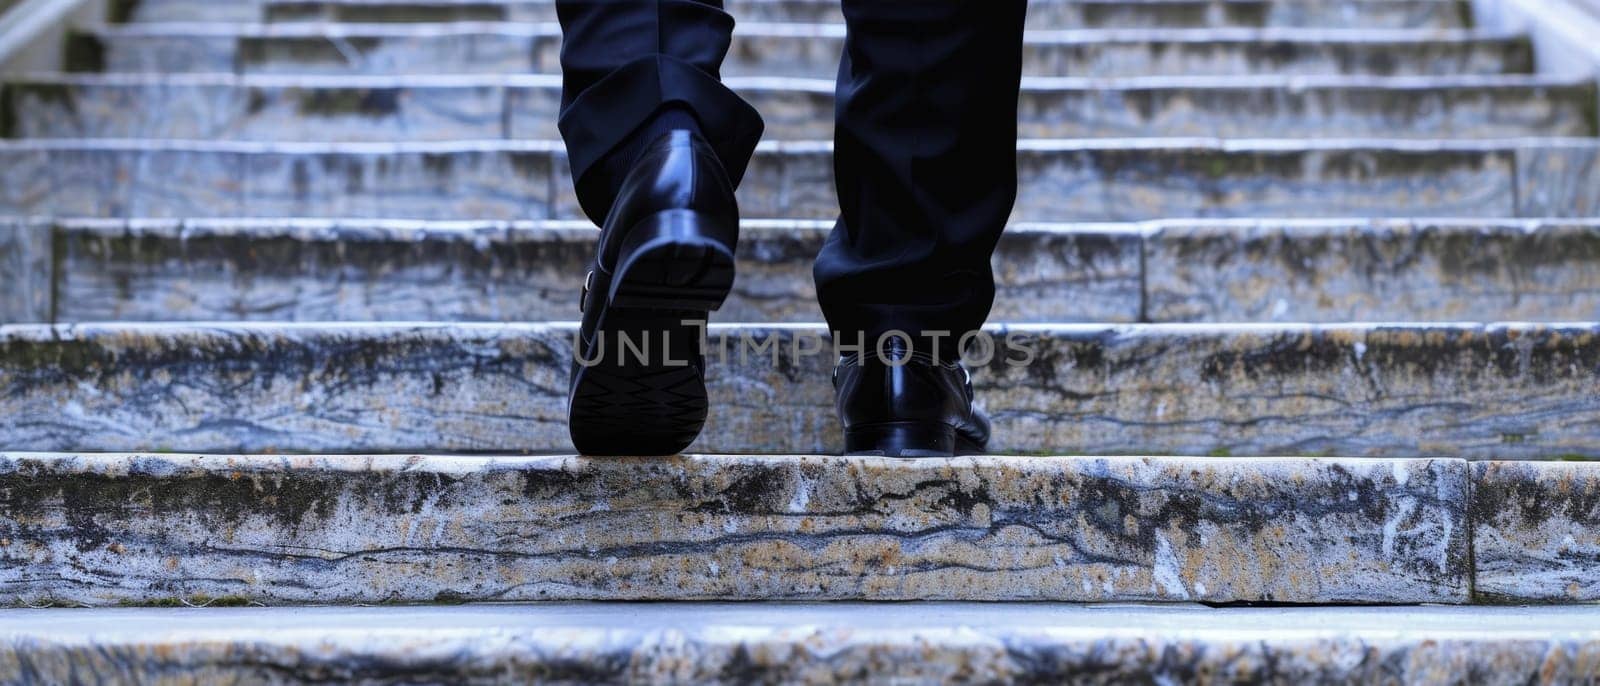 An individual in business attire confidently advances up an outdoor staircase, wearing a pair of sleek black dress shoes by sfinks